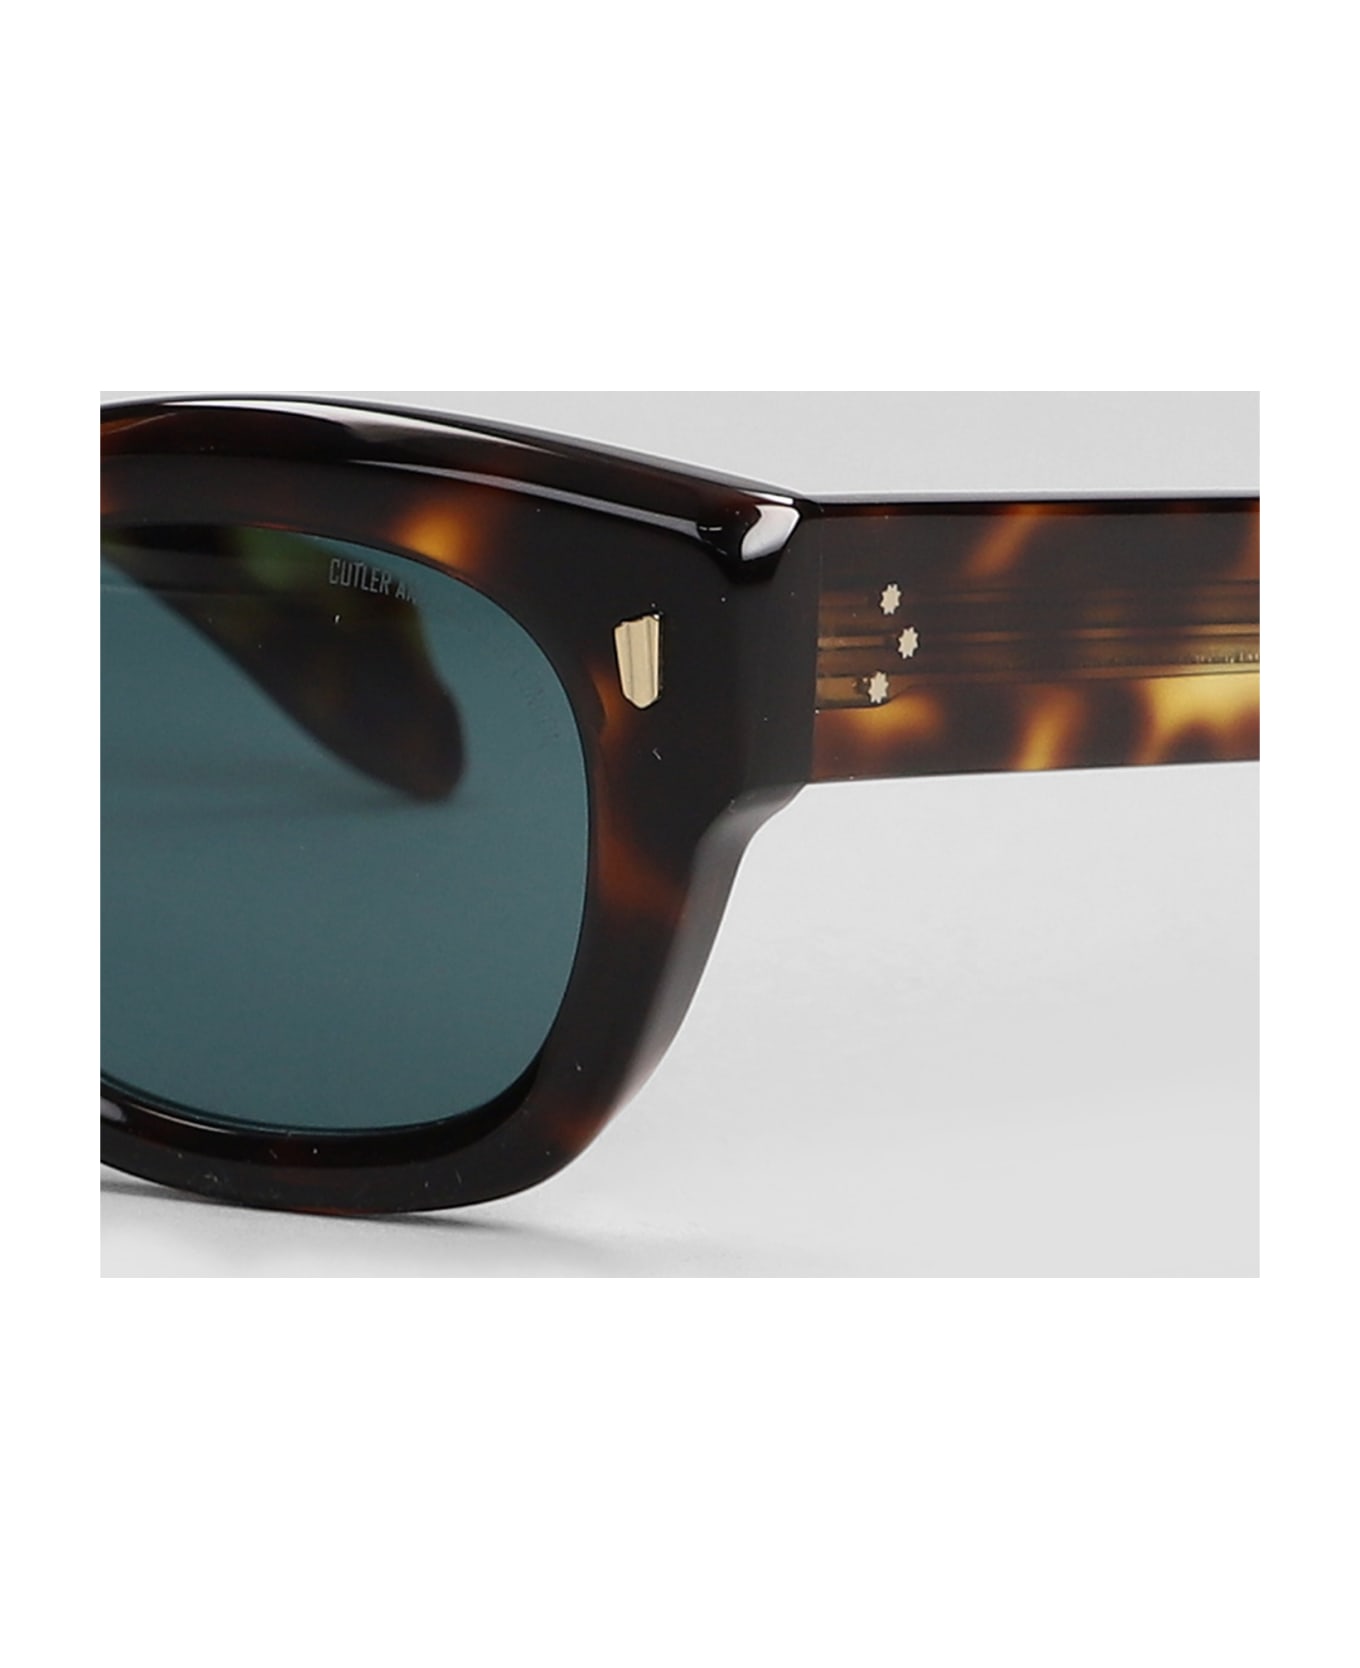 Cutler and Gross 9261 Sunglasses In Brown Acetate - brown